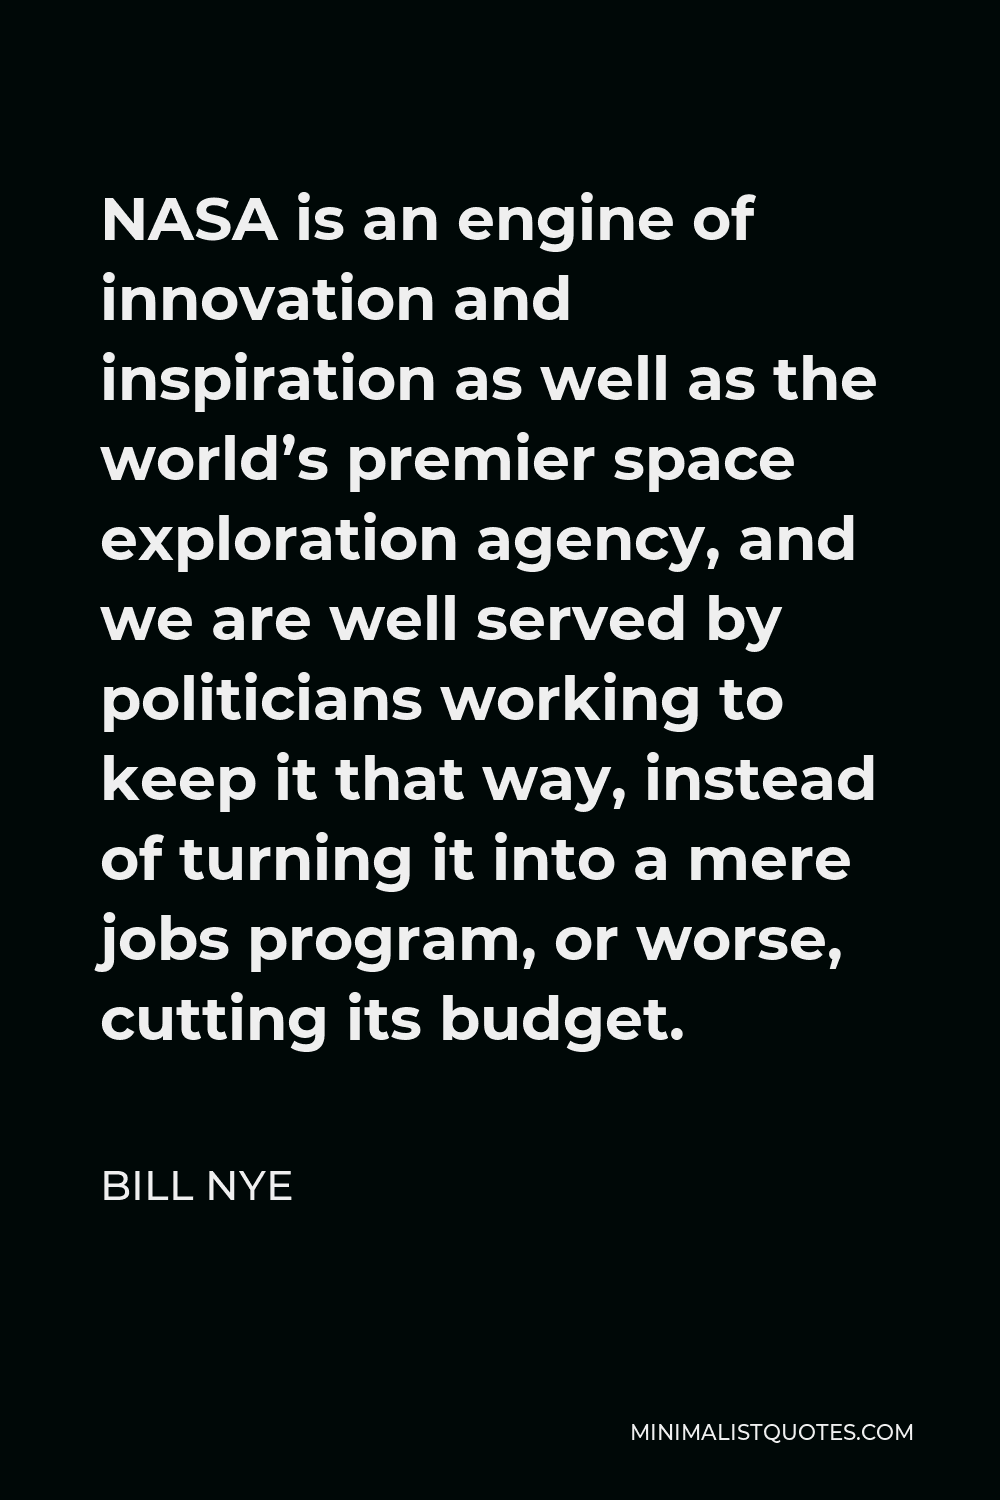 Bill Nye Quote - NASA is an engine of innovation and inspiration as well as the world’s premier space exploration agency, and we are well served by politicians working to keep it that way, instead of turning it into a mere jobs program, or worse, cutting its budget.